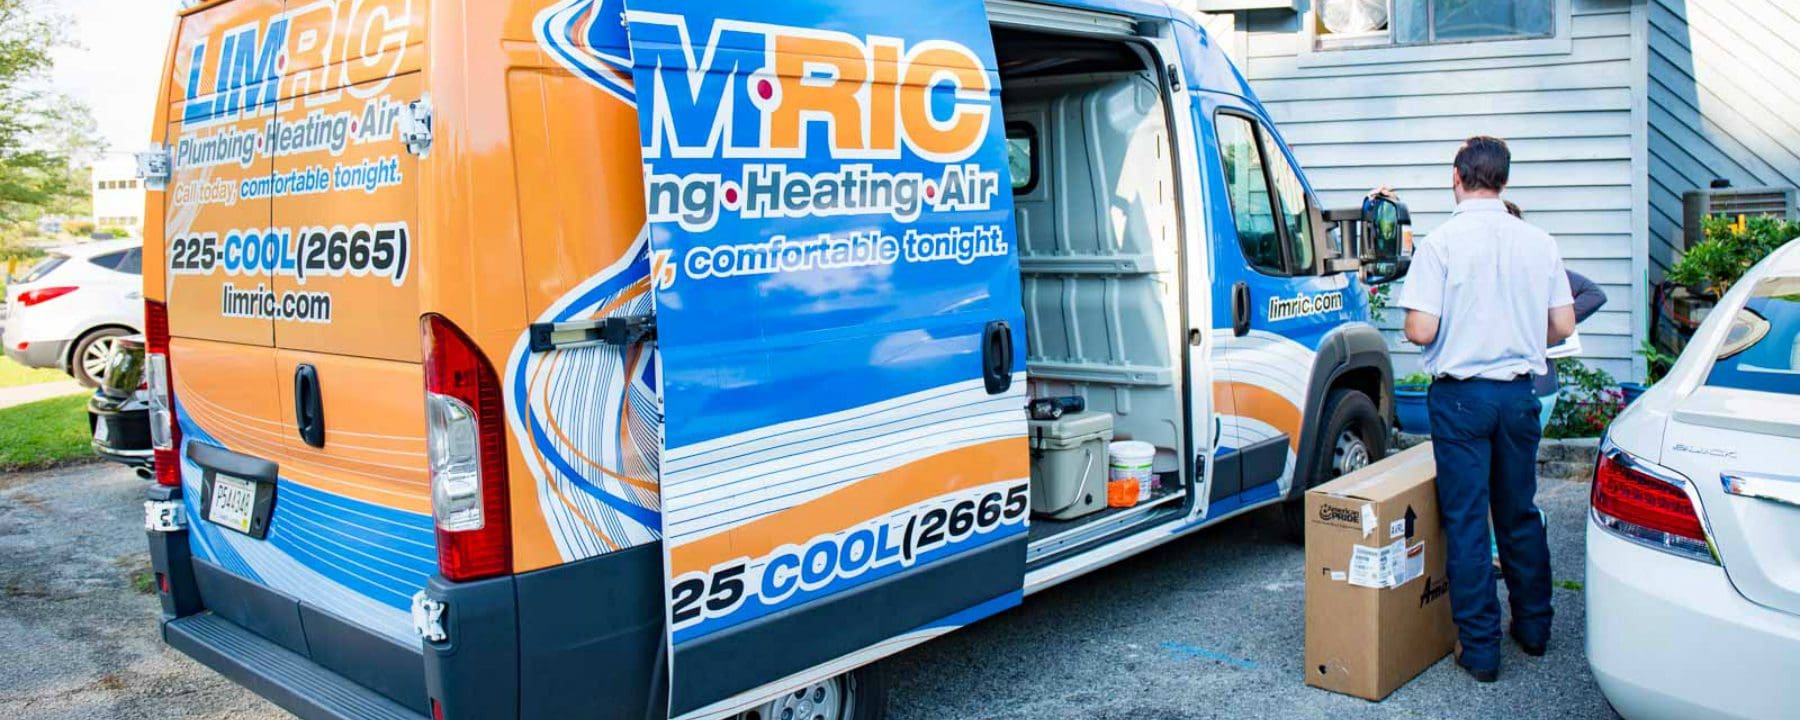 Featured image for “LimRic Plumbing, Heating & Air: The Experts in HVAC Repair”